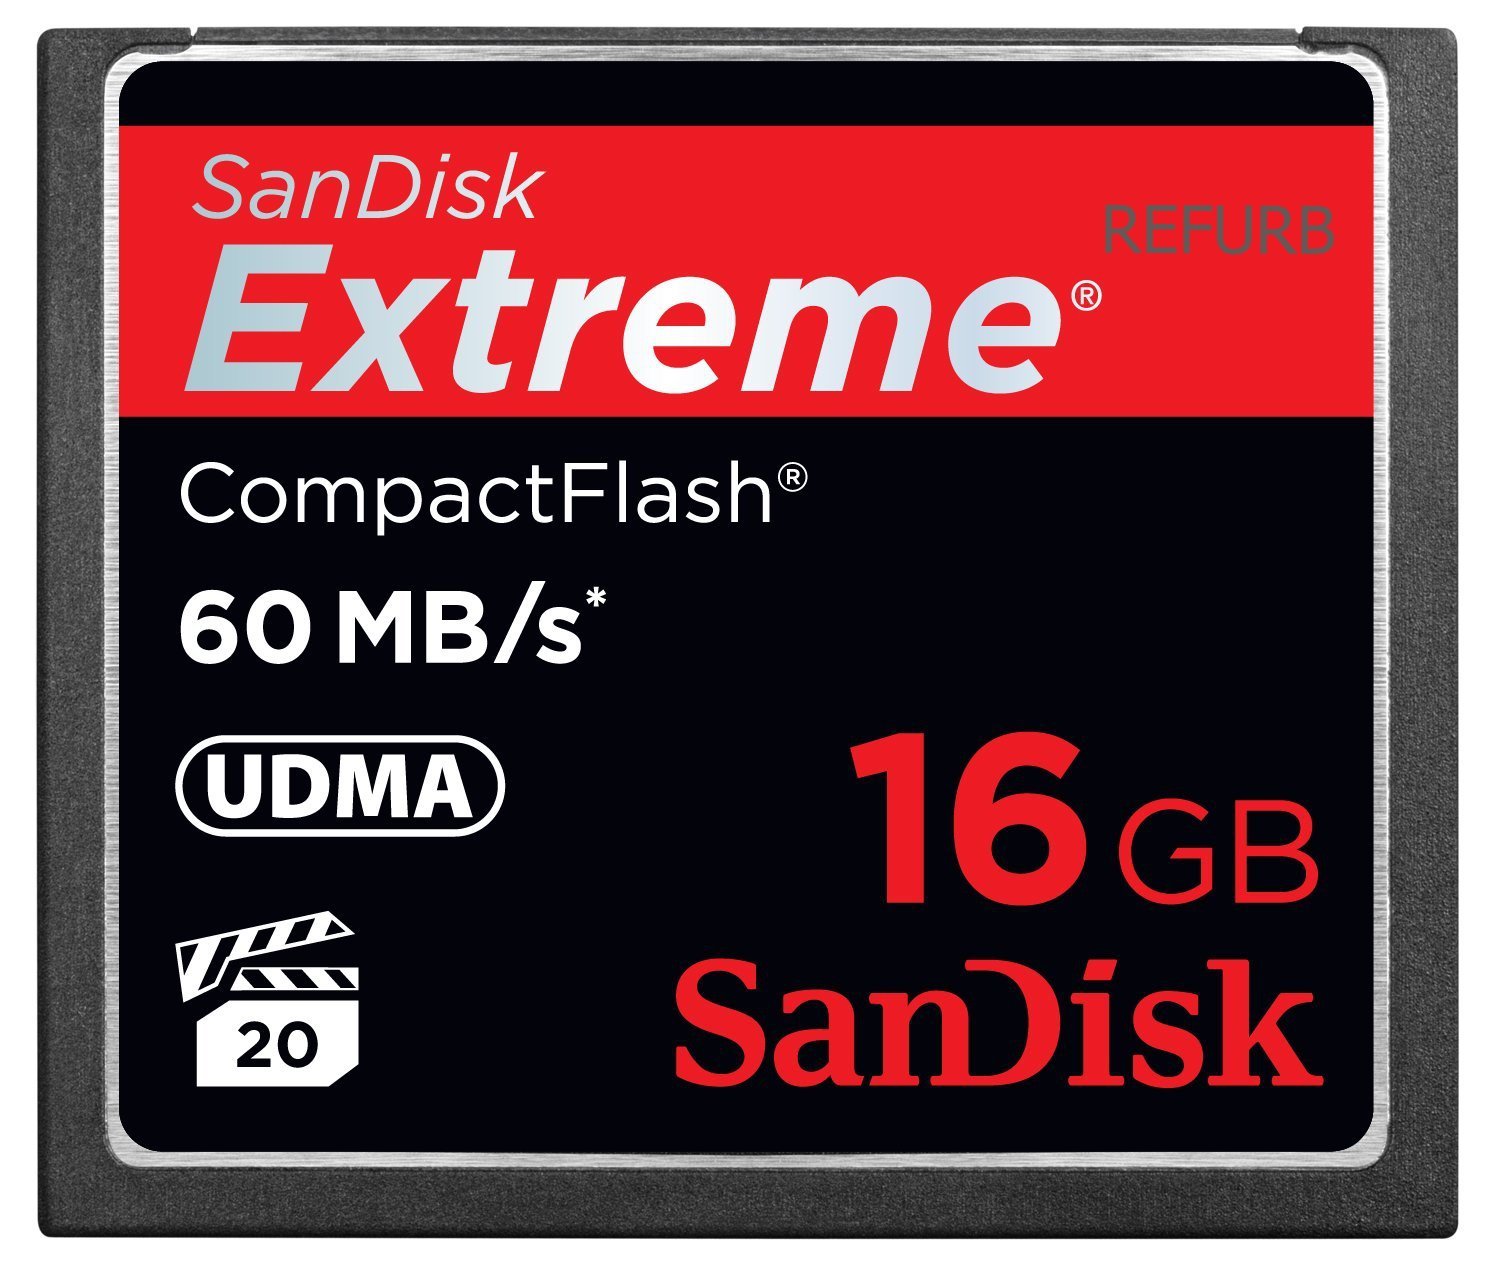 SanDisk Extreme 16GB CF Card 60MB/s SDCFX-016G-X46 (Certified Refurbished)